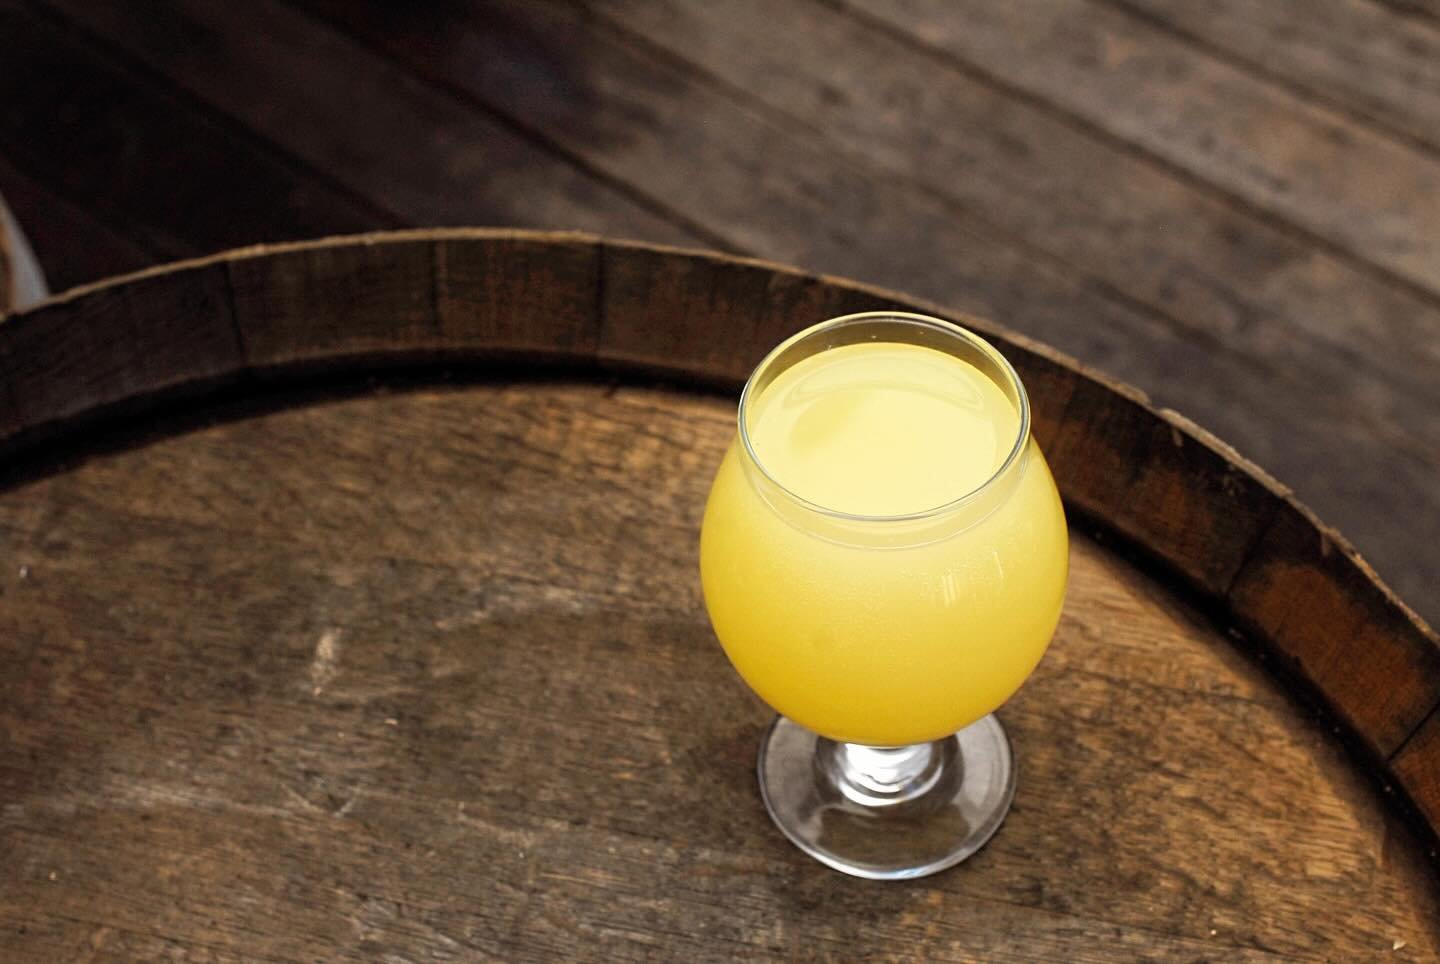 It&rsquo;s 85 degrees and Mother&rsquo;s day weekend, this calls for all the mimosas! 
Come cool off and enjoy some brews!

#momday #mothersdayqeekend #mimosas